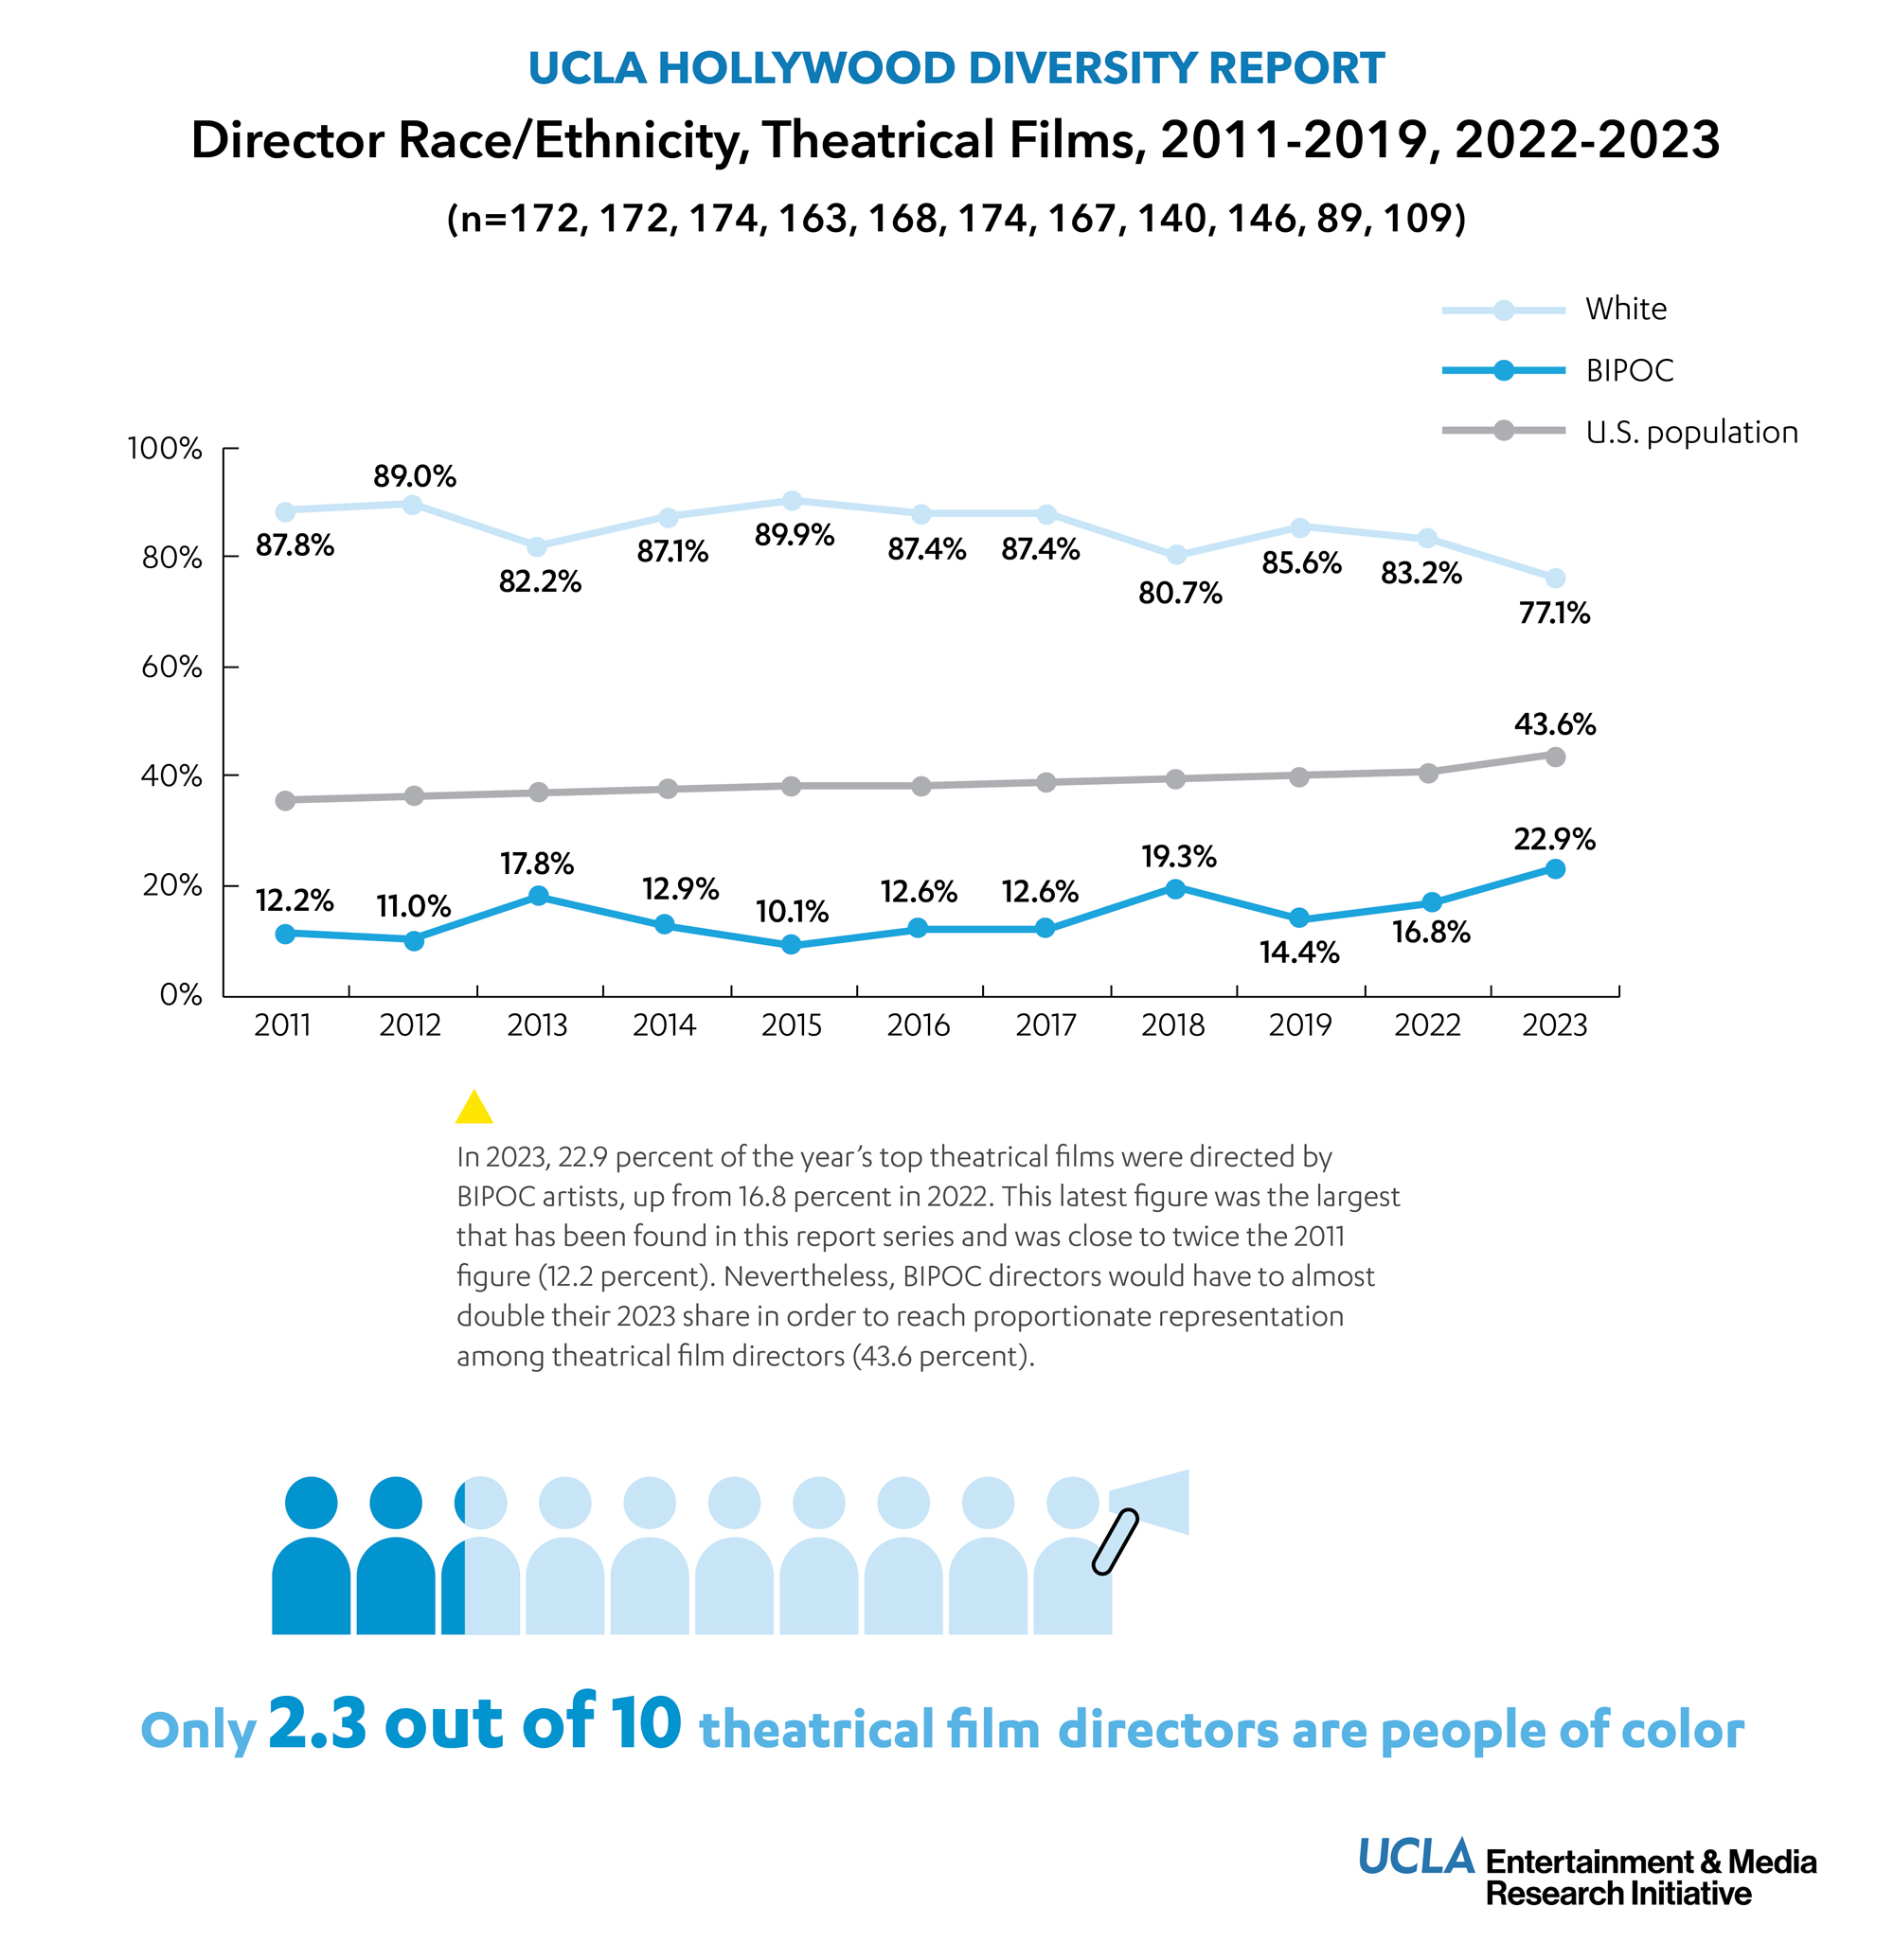 A chart showing the racial demographics of Hollywood directors over time